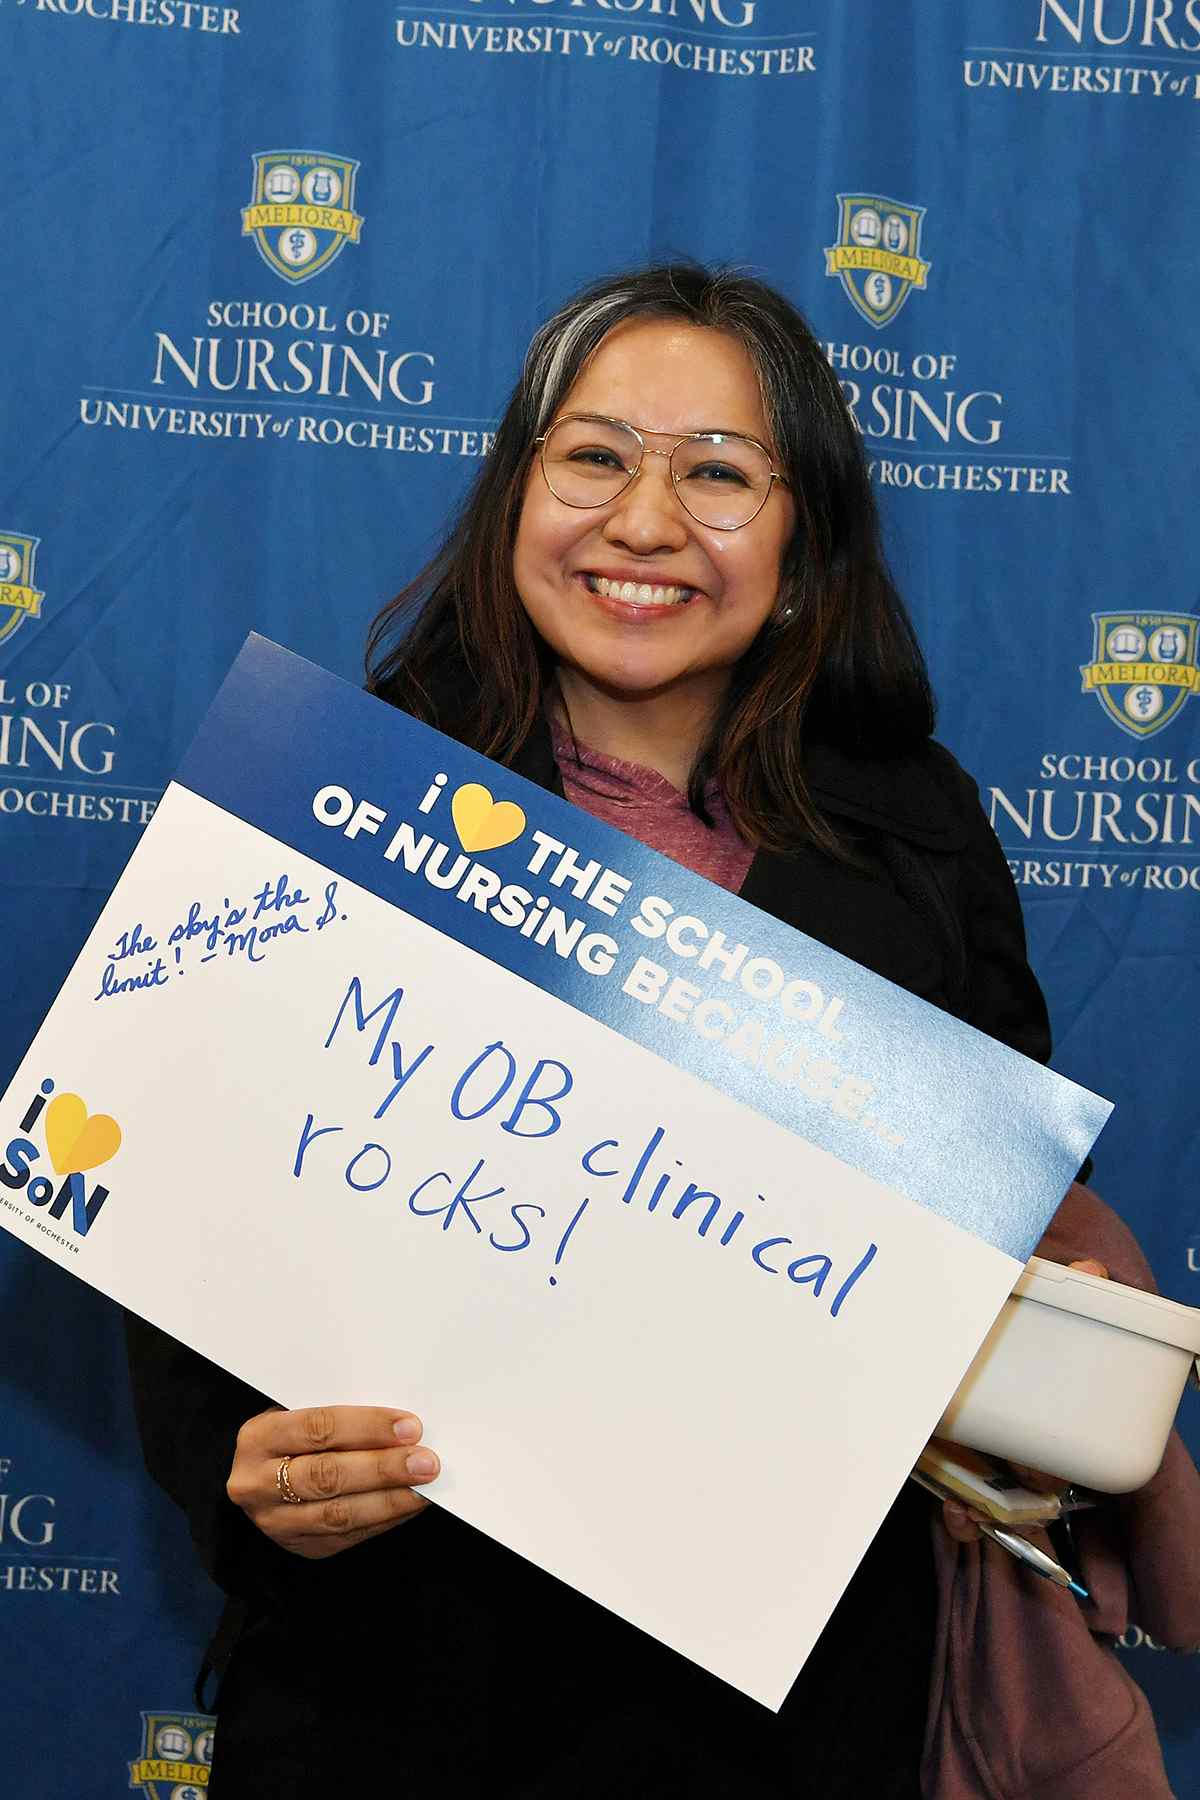 Mona Sepulveda, a UR Nursing Scholar, holds a sign that says "My OB Clinical Rocks"